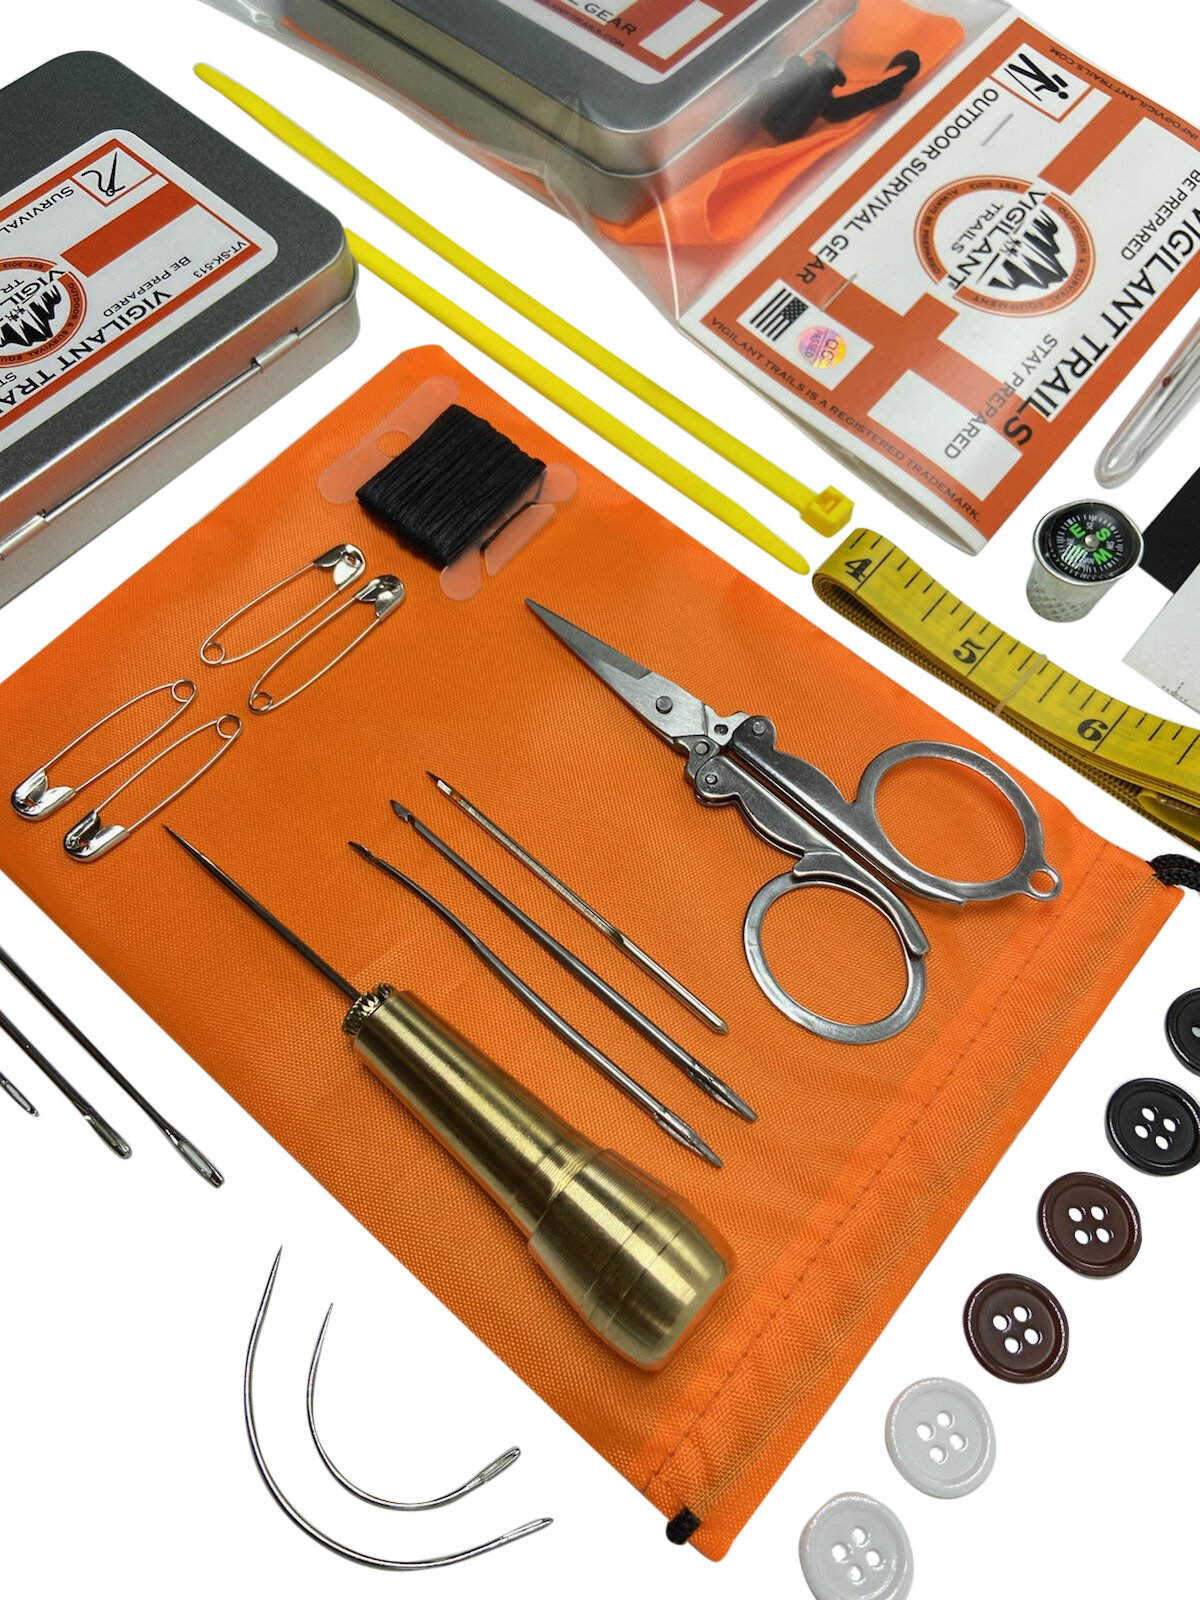 Gear Aid Outdoor Sewing Kit - FERAL